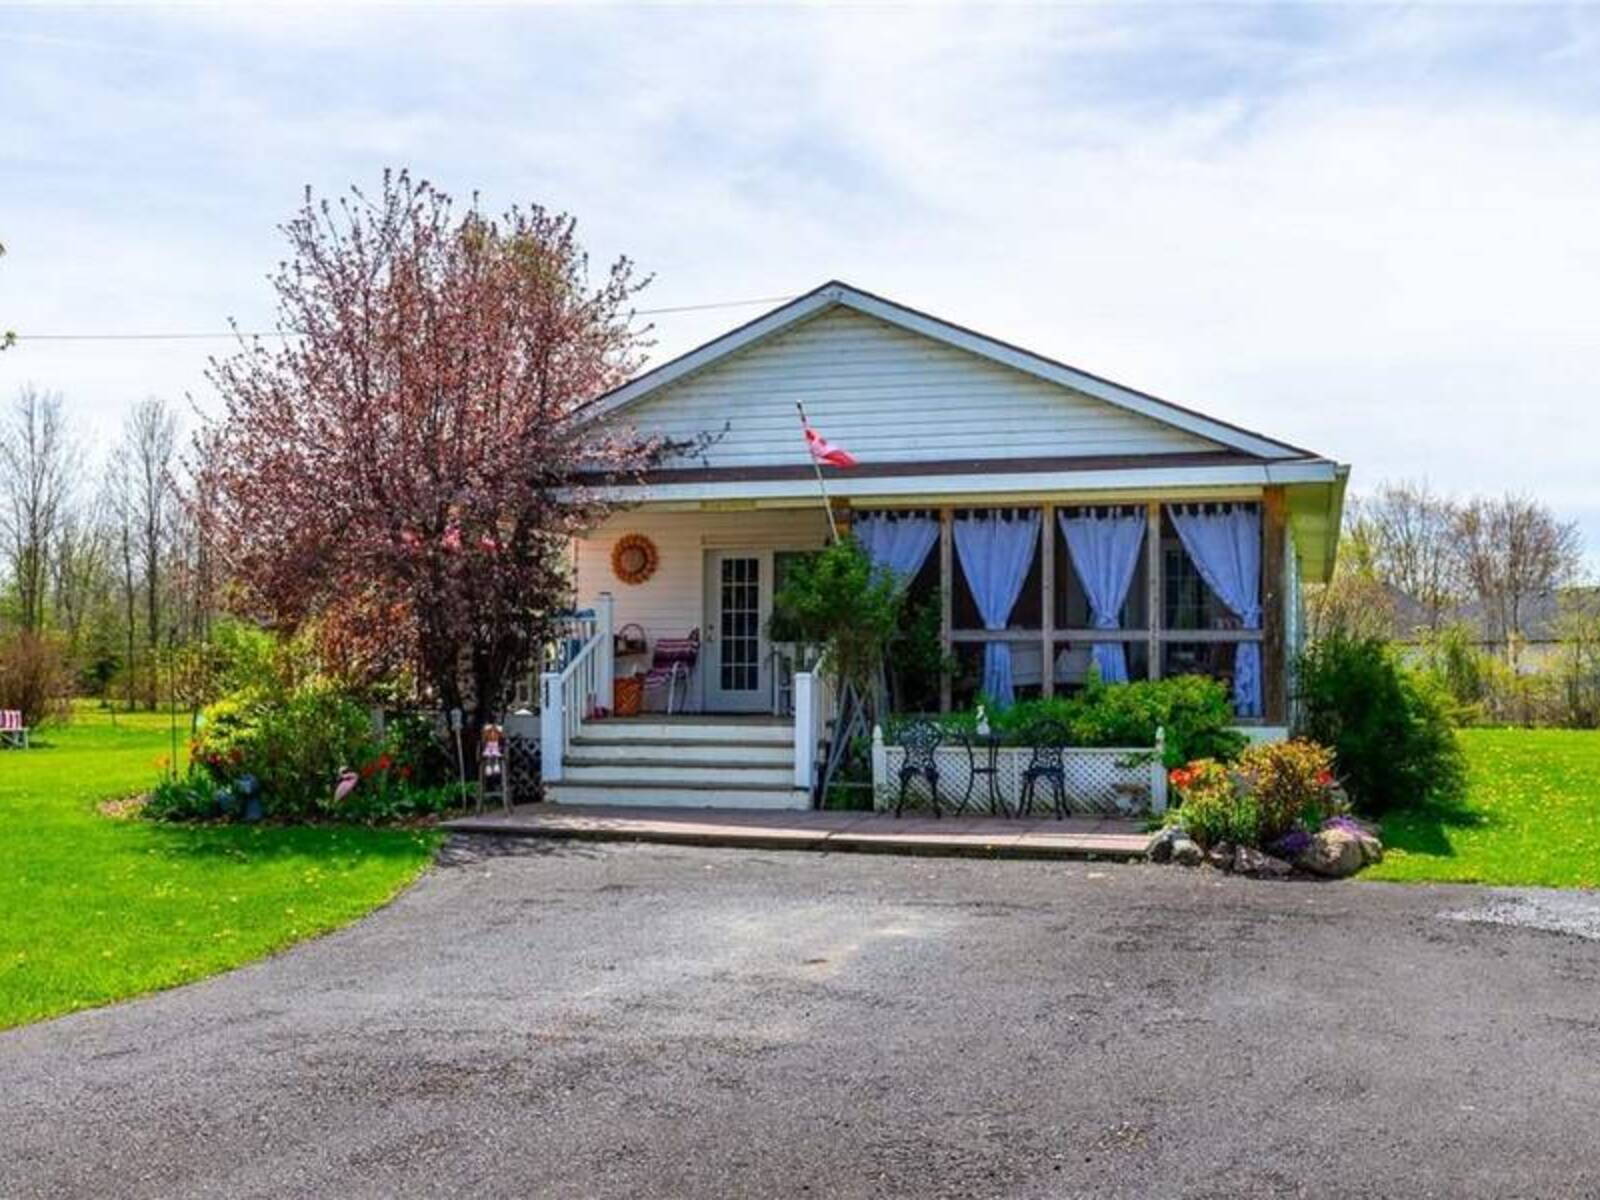 45 Witherspoon Avenue, Peacock Point, Ontario N0A 1P0